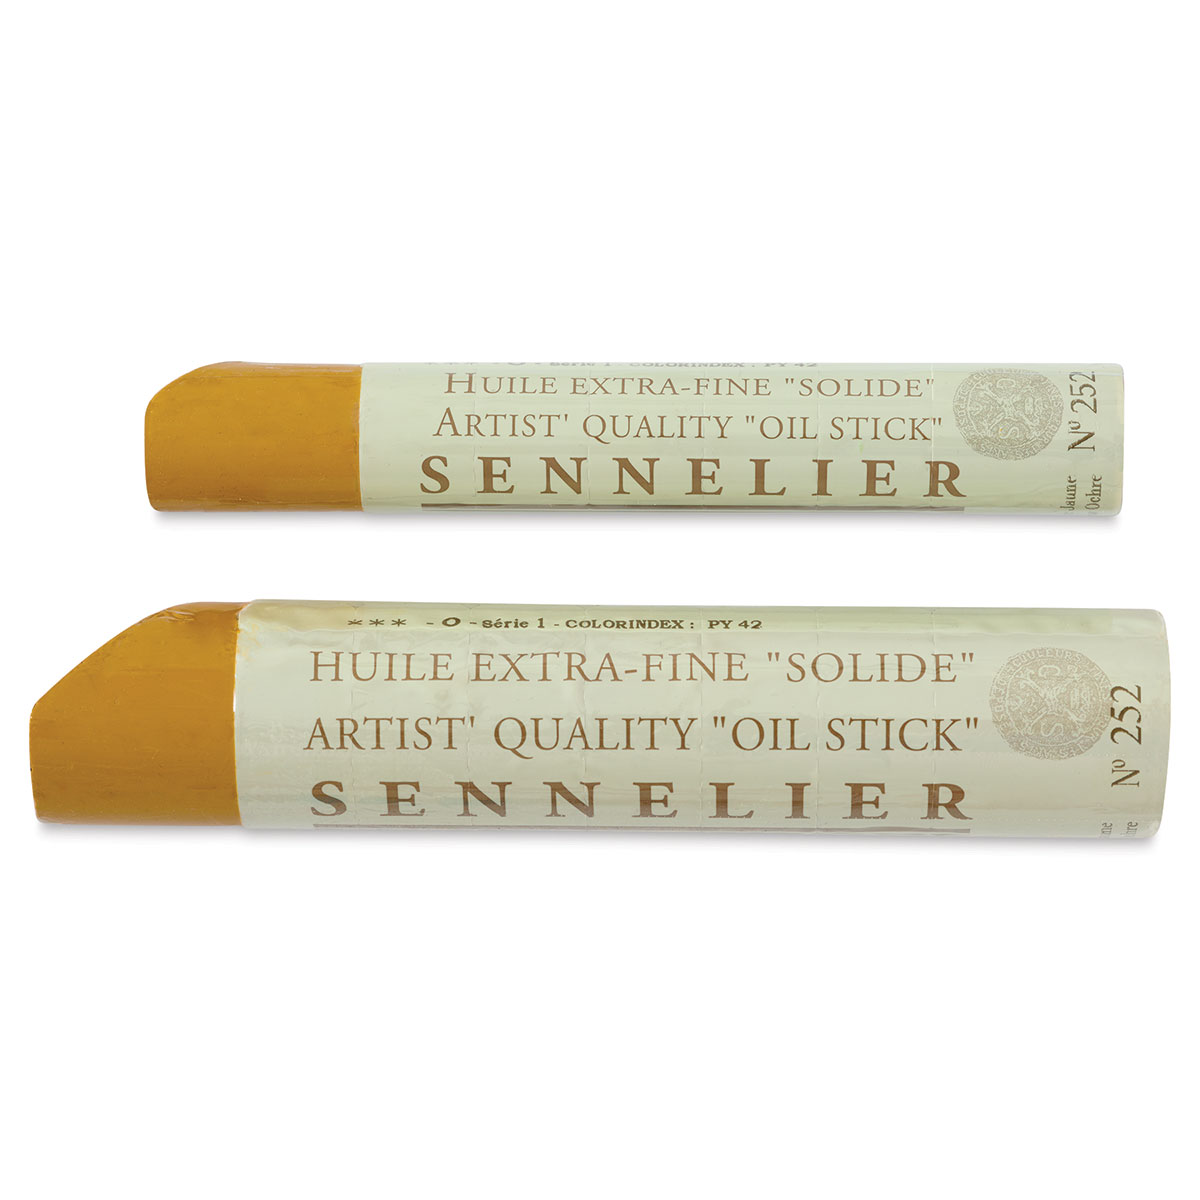 This is Sennelier Oil Stick 